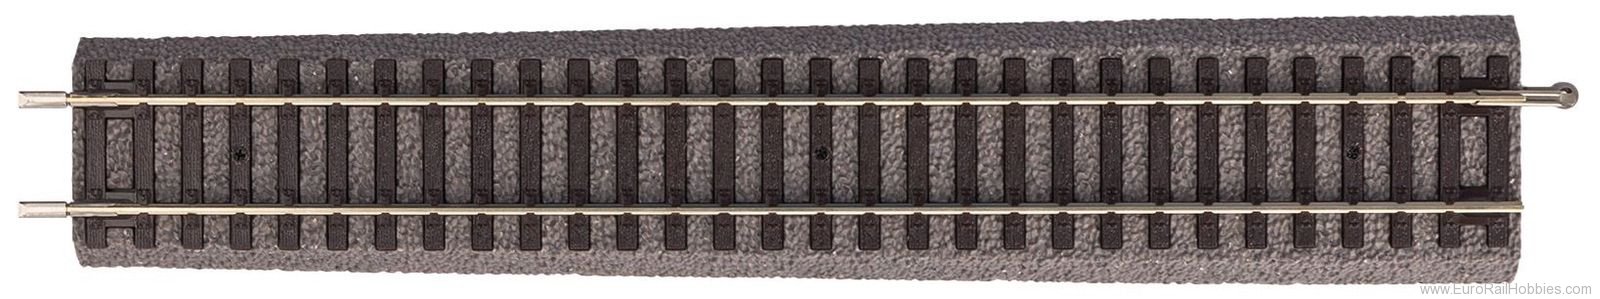 Piko 55433 PIKO A-track w roadbed, Transition track to R